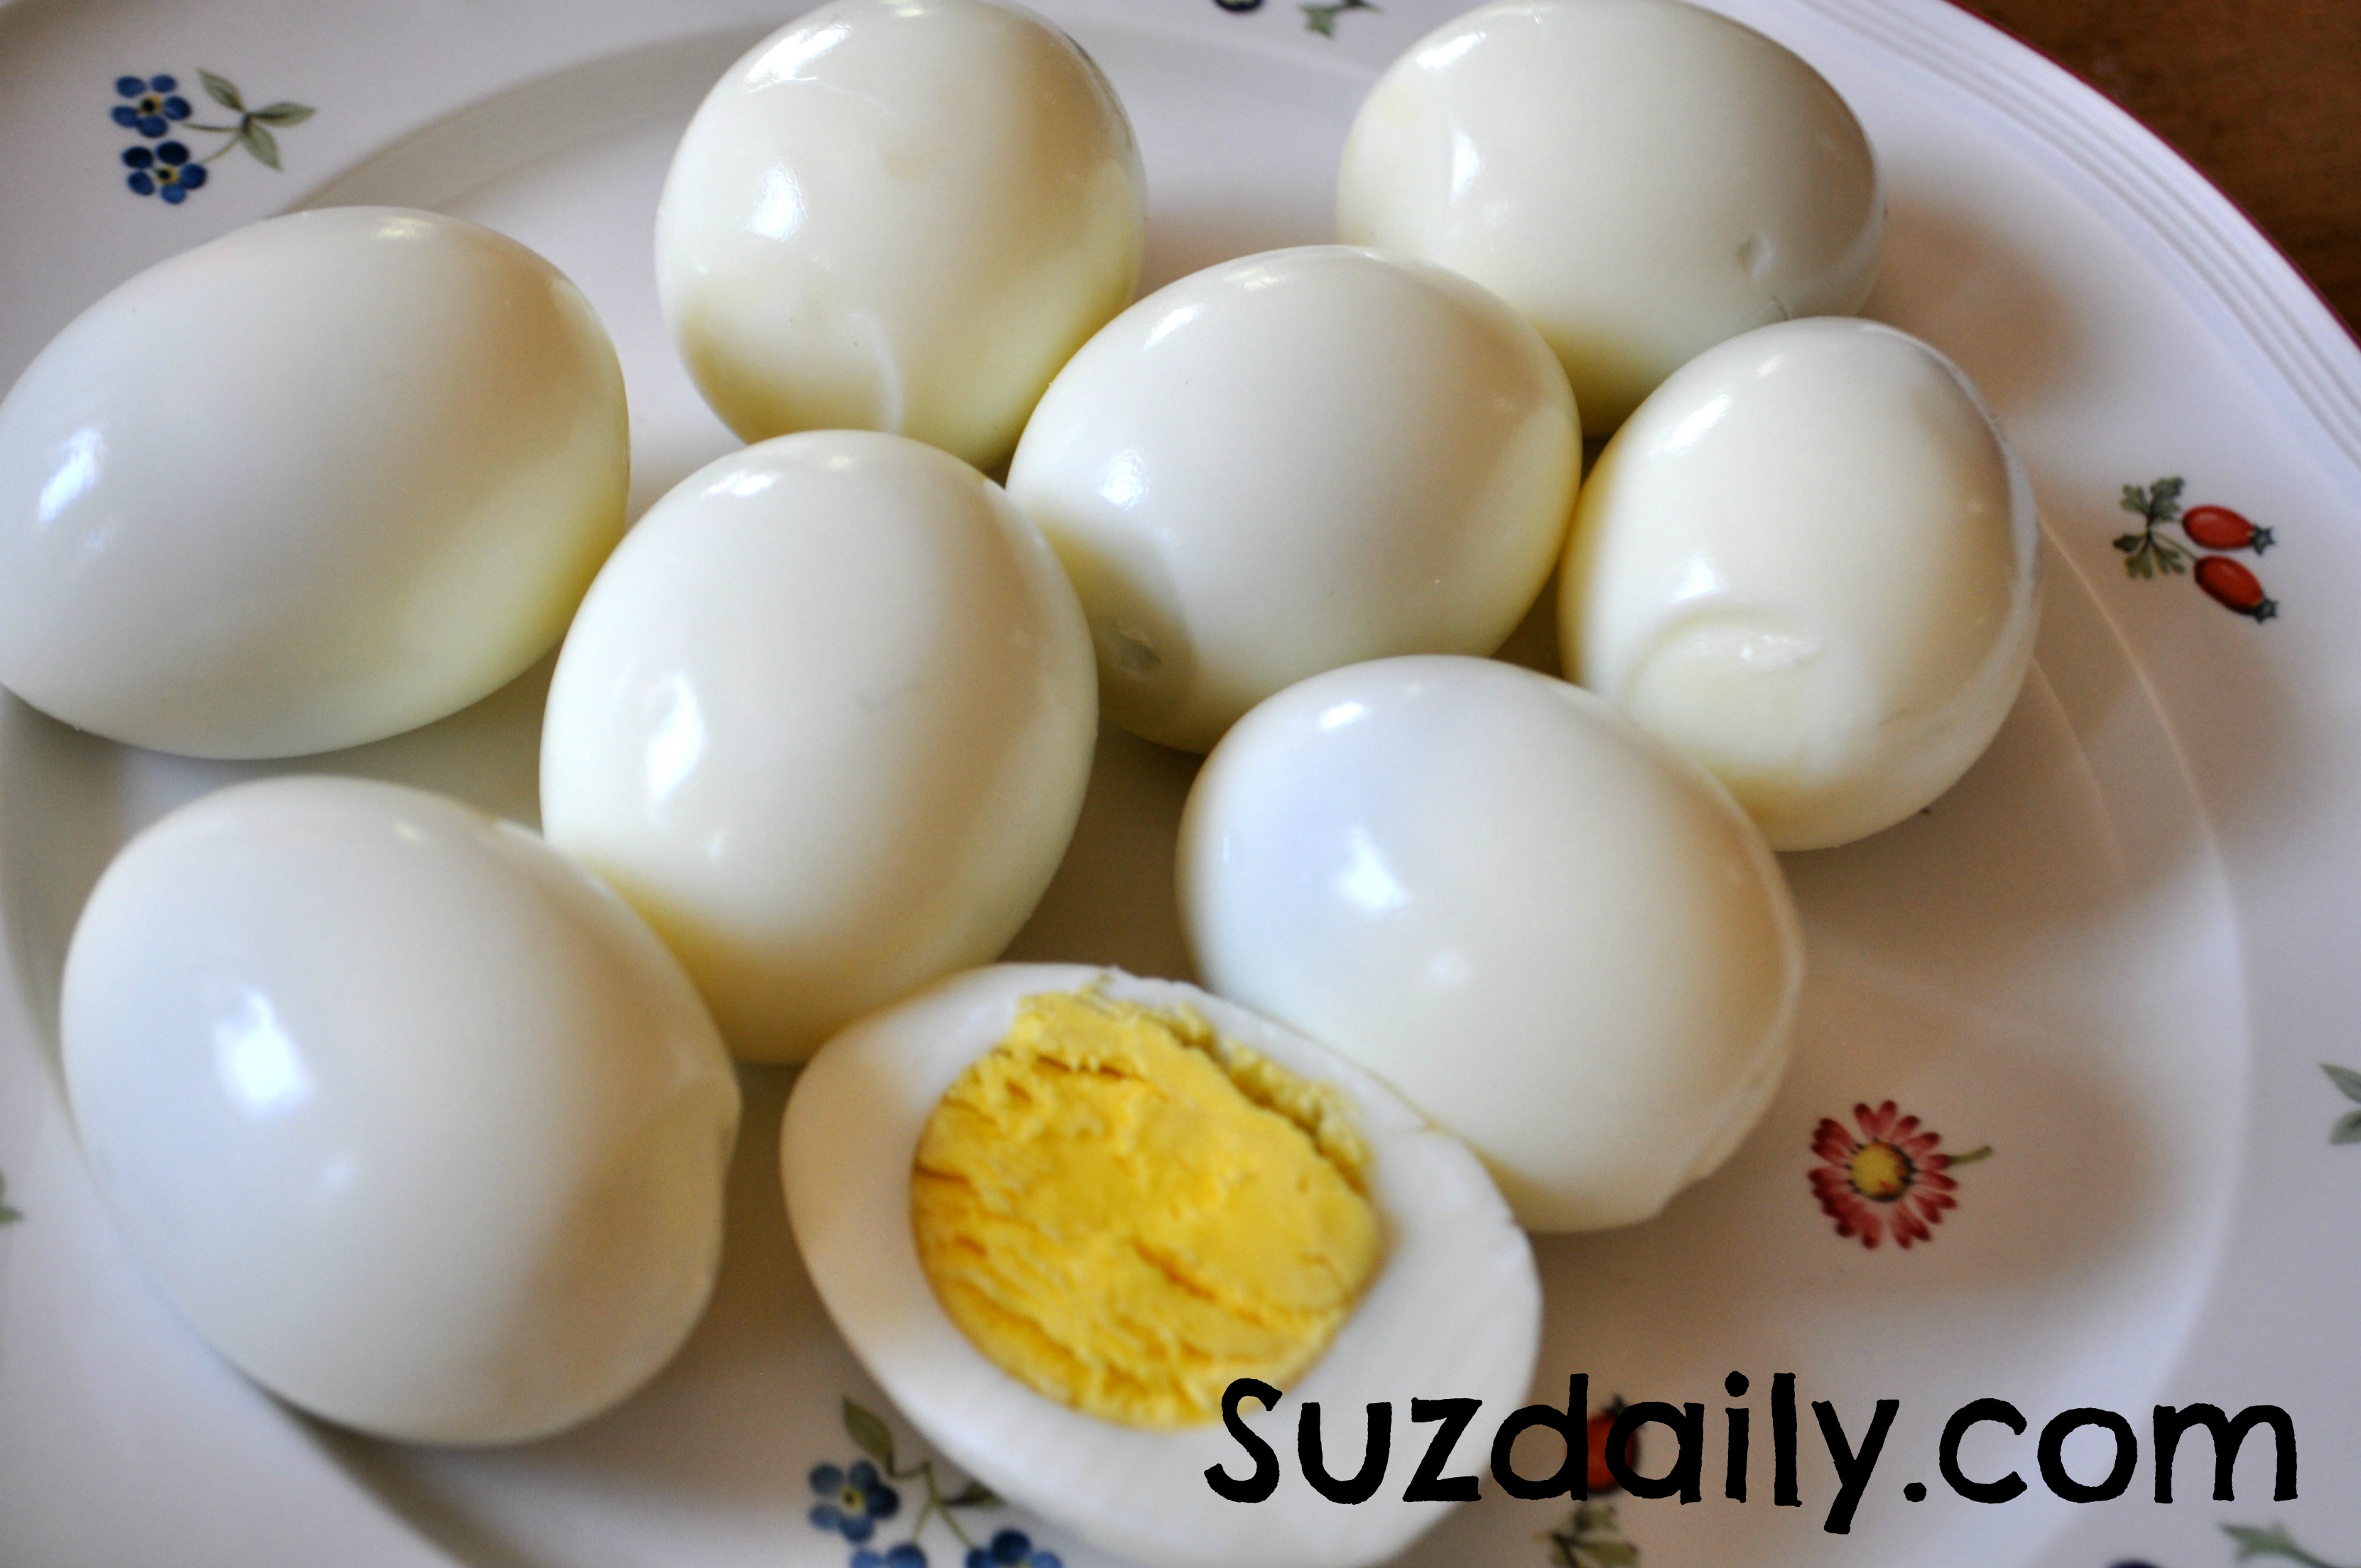 How To Make Hard Boiled Eggs In The Pressure Cooker Suz Daily